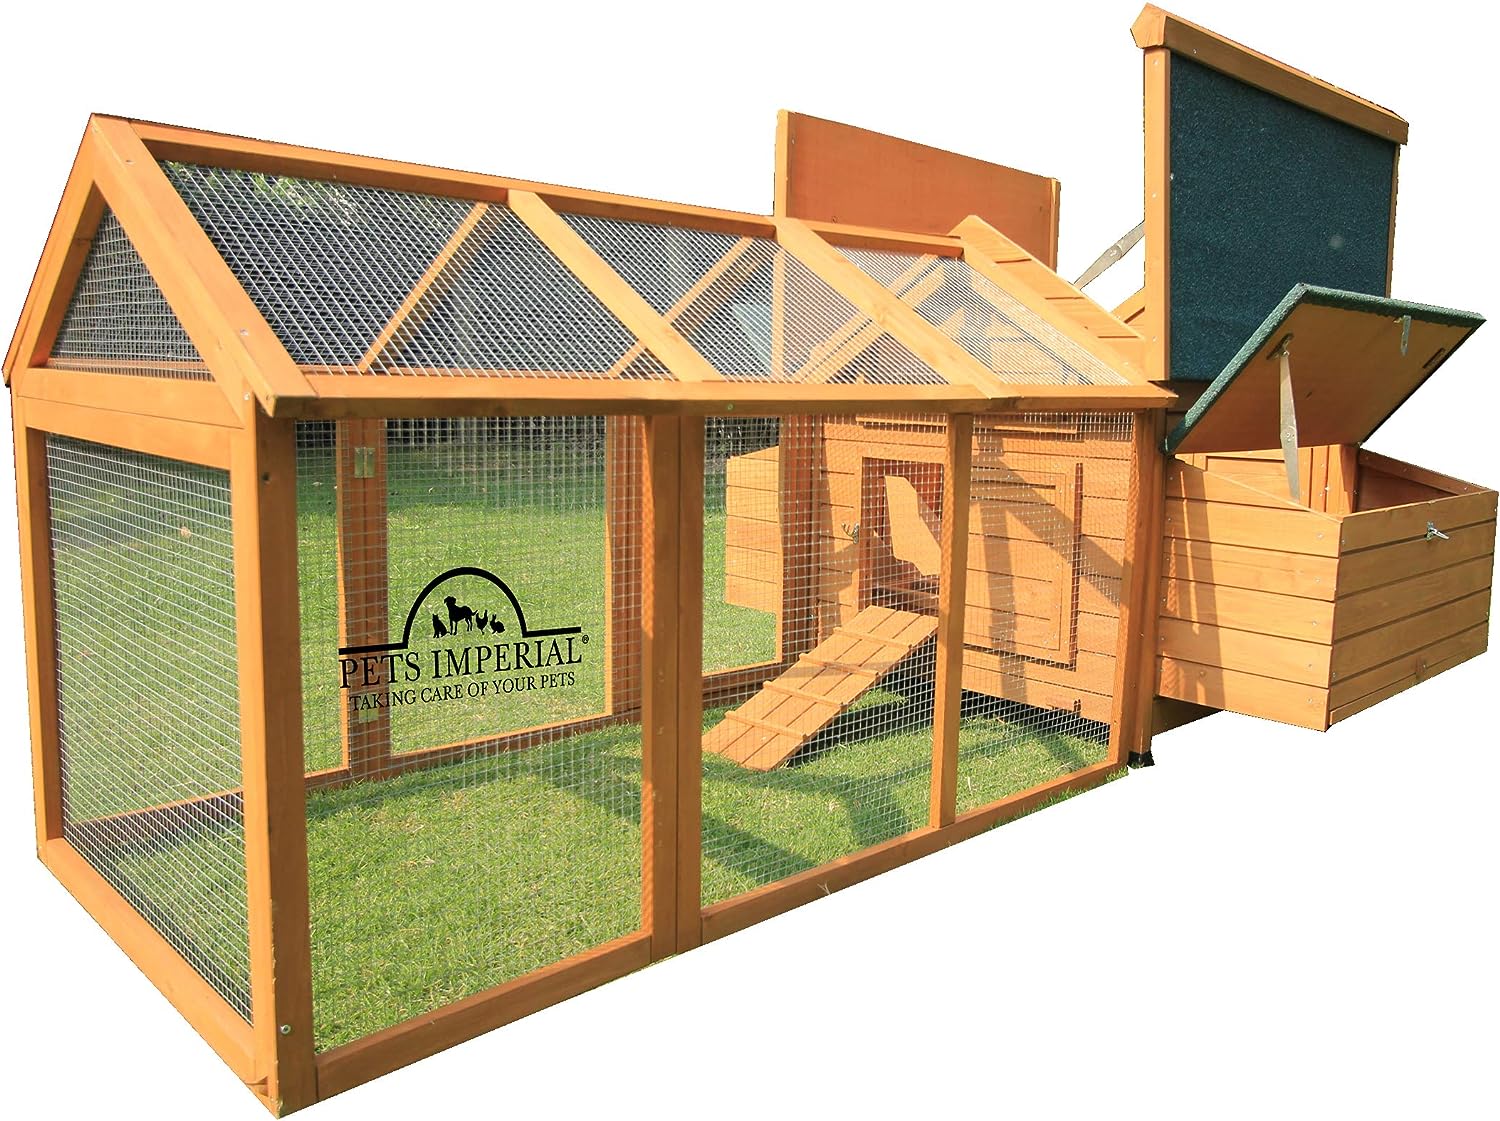 Pets Imperial Double Savoy Chicken Coop Review